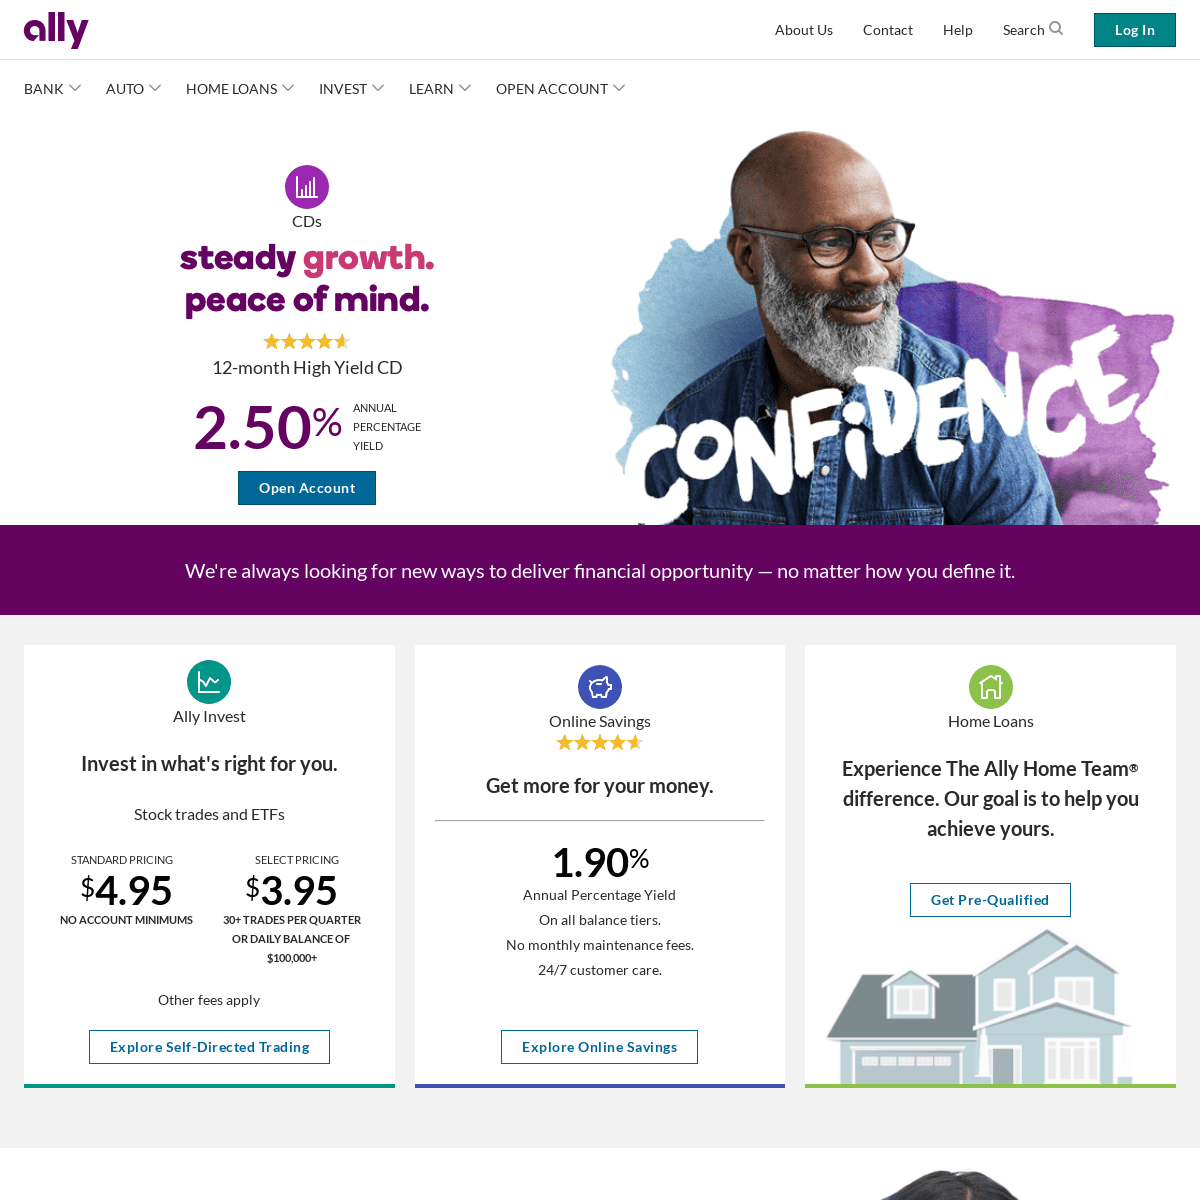 Banking, Investing, Home Loans & Auto Finance | Ally